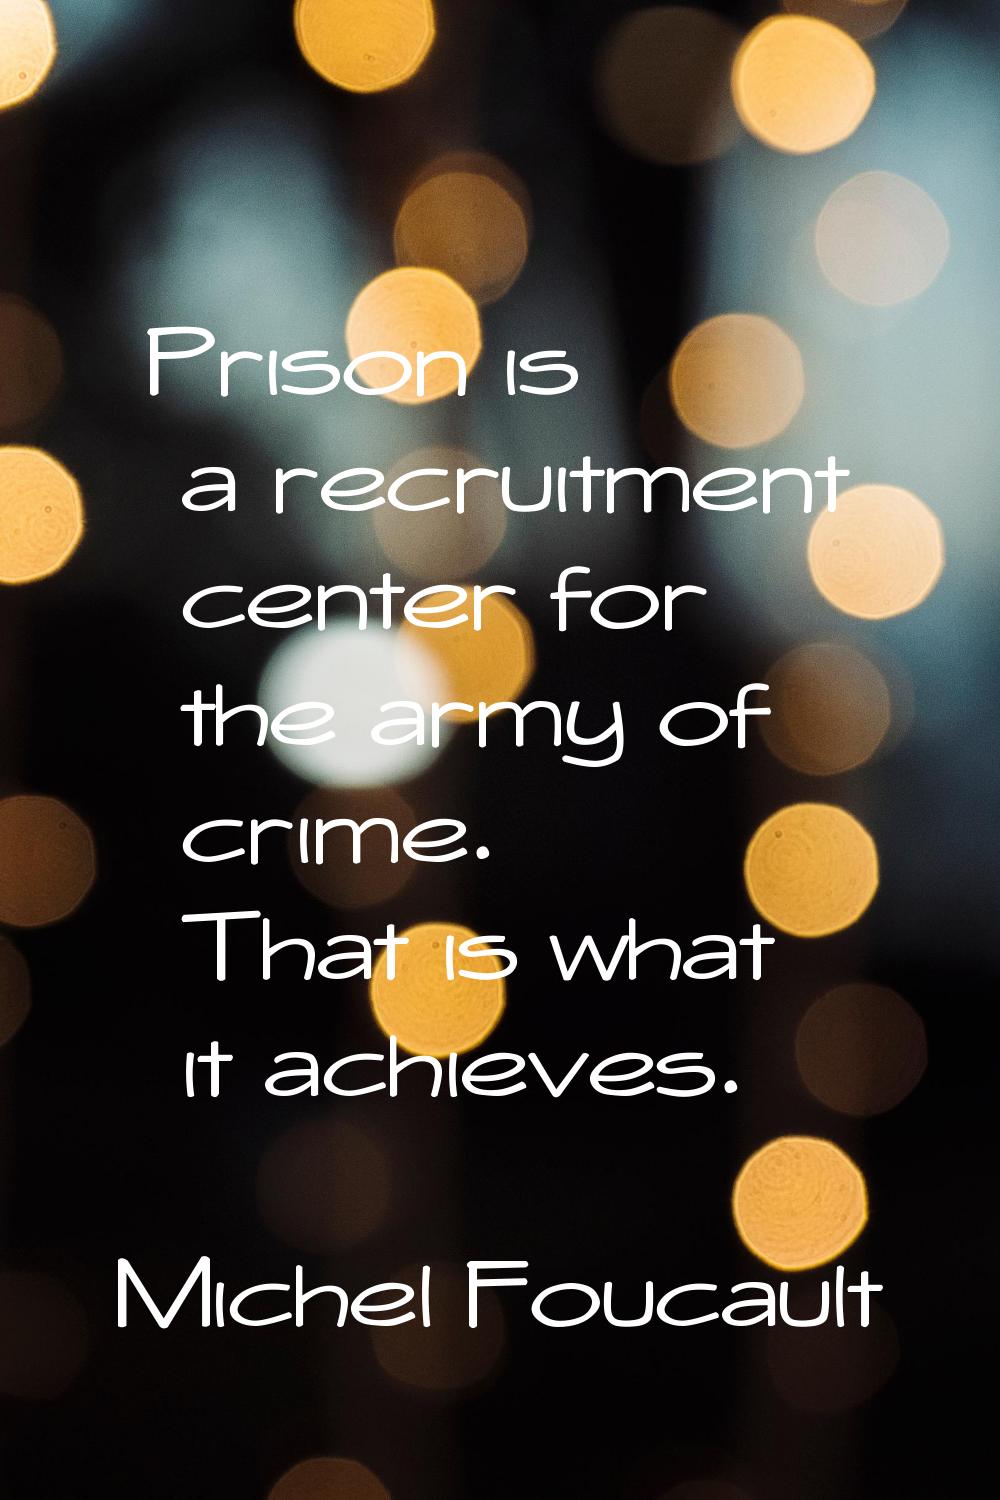 Prison is a recruitment center for the army of crime. That is what it achieves.